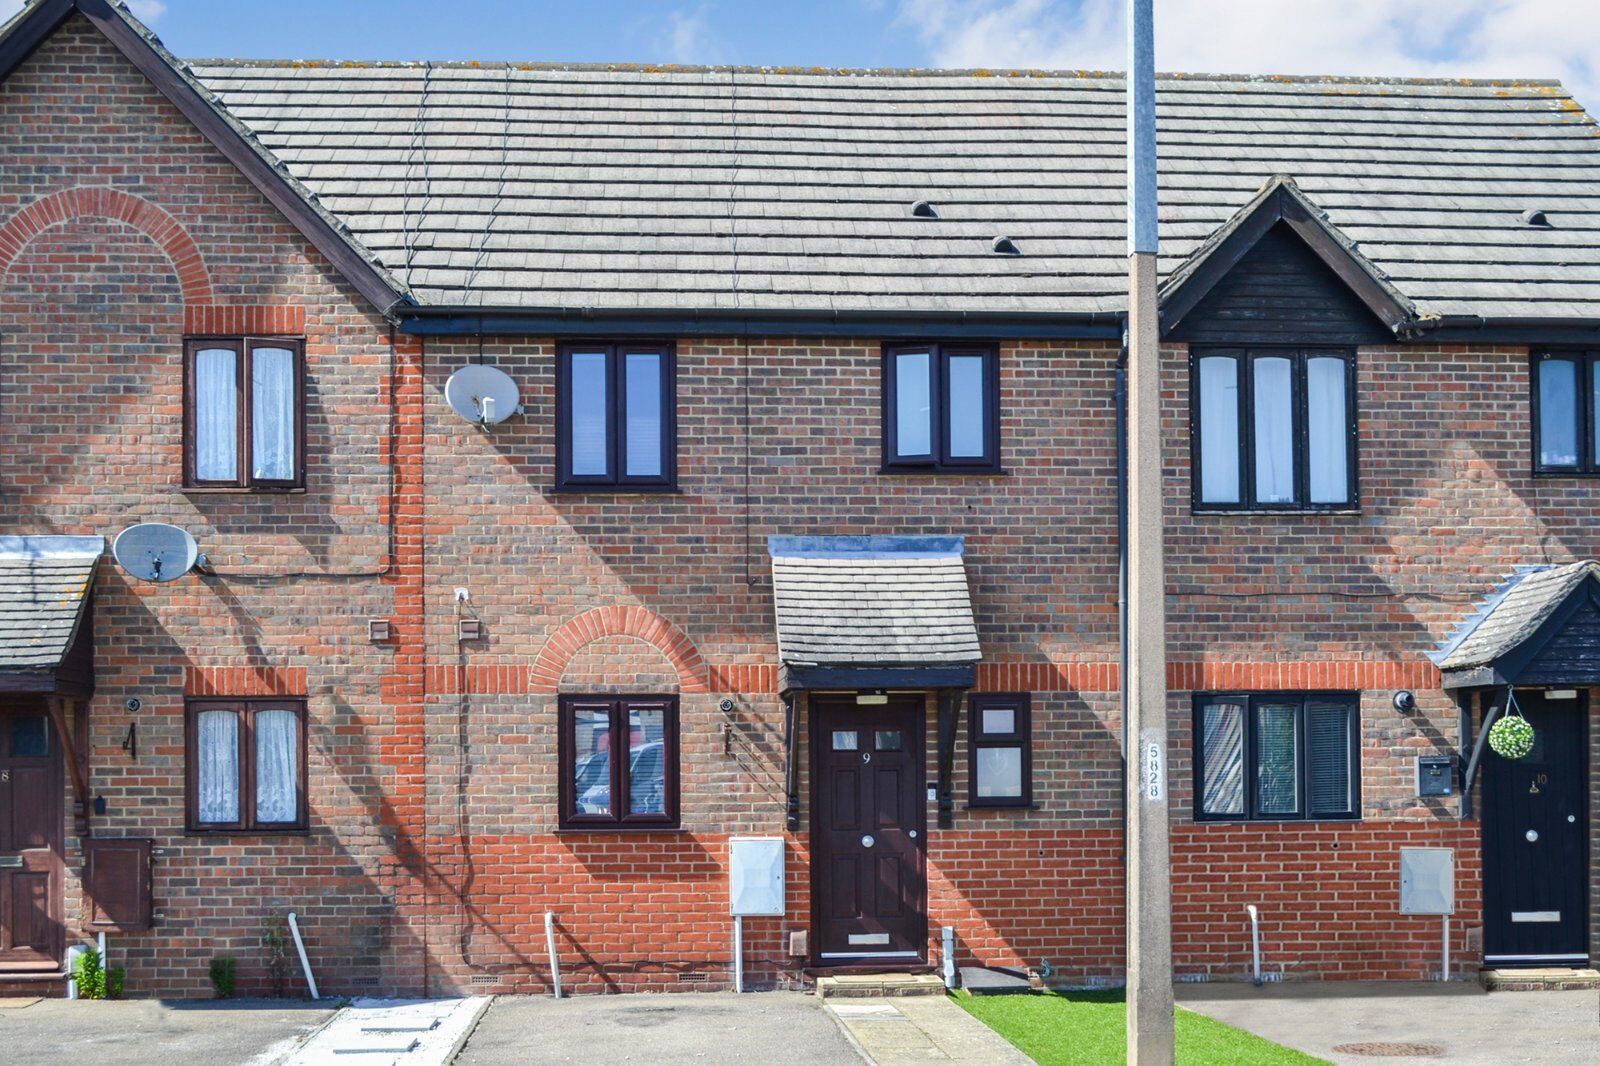 3 bedroom mid terraced house for sale Pegrams Court, Pegrams Road, CM18, main image